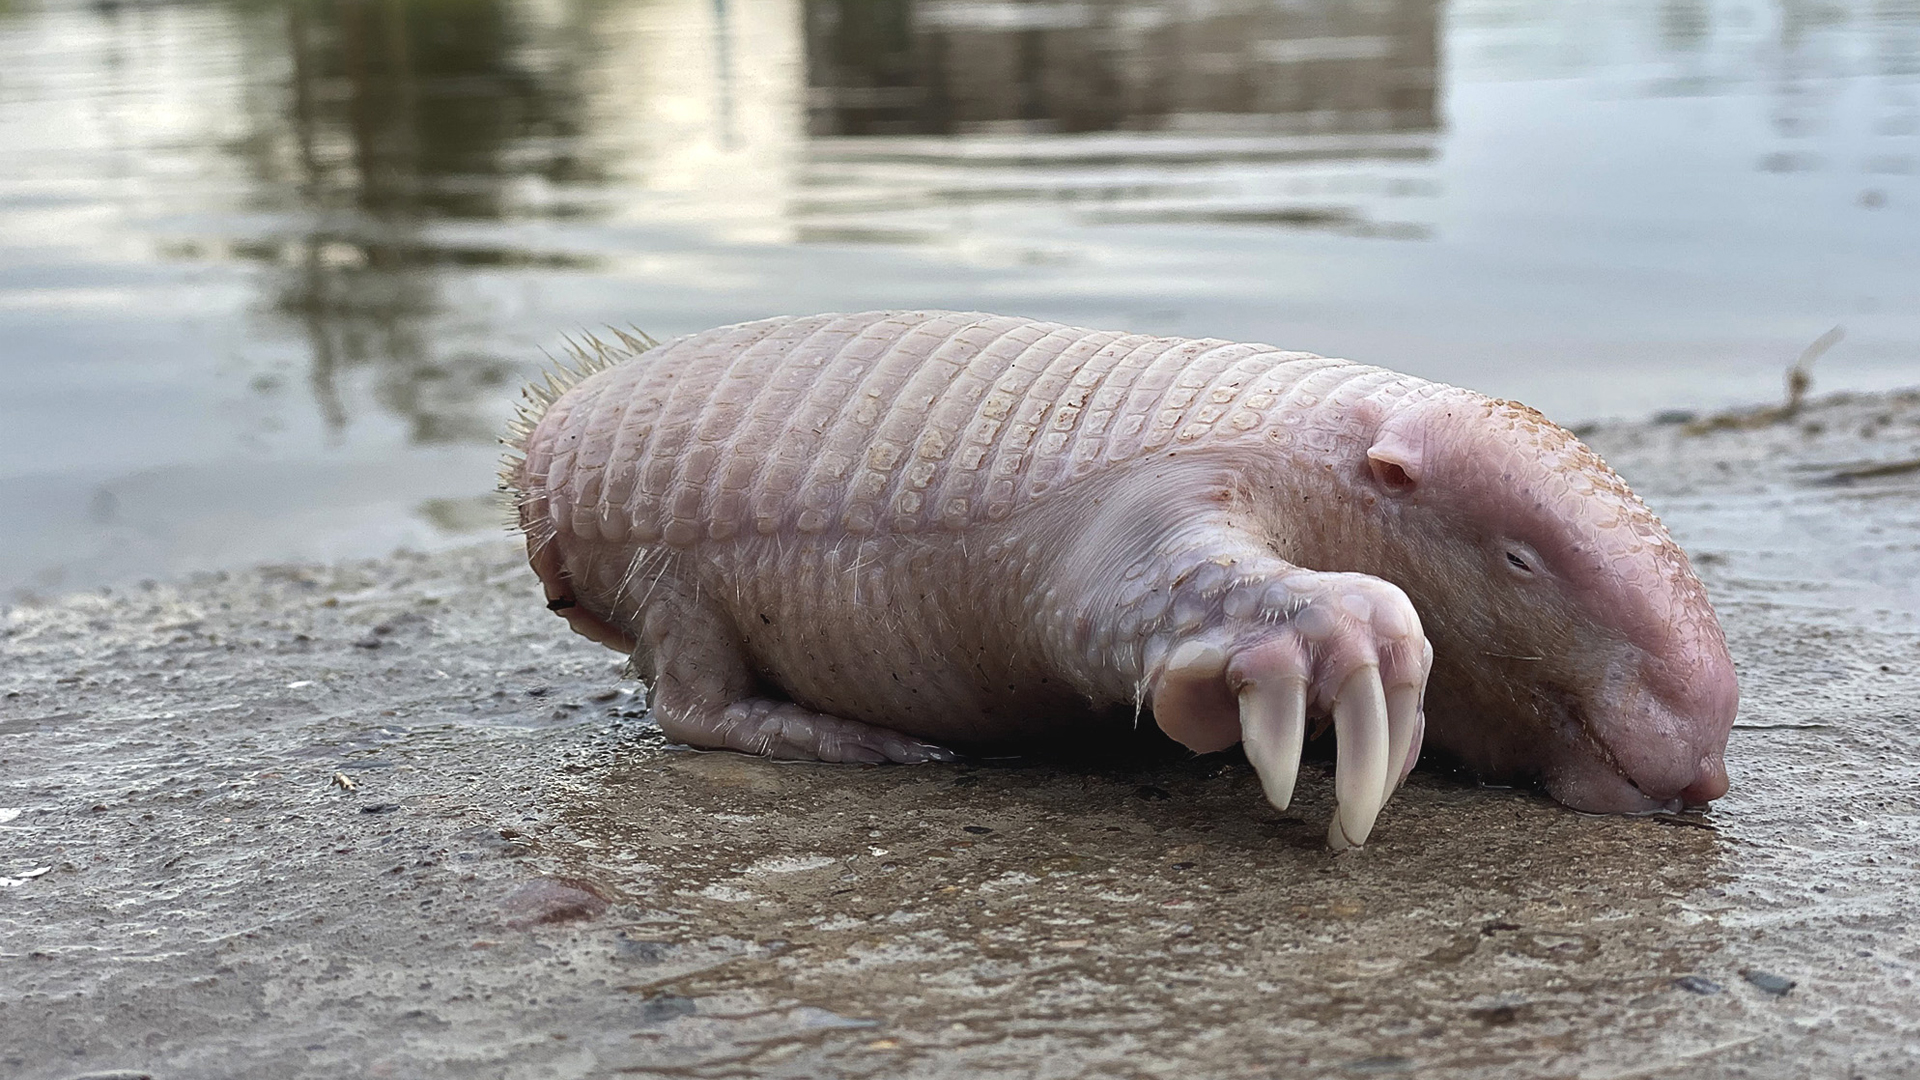 VIDEO: Dead Scary: Tiny Armadillo Whose Eerie Cry Signals A Death